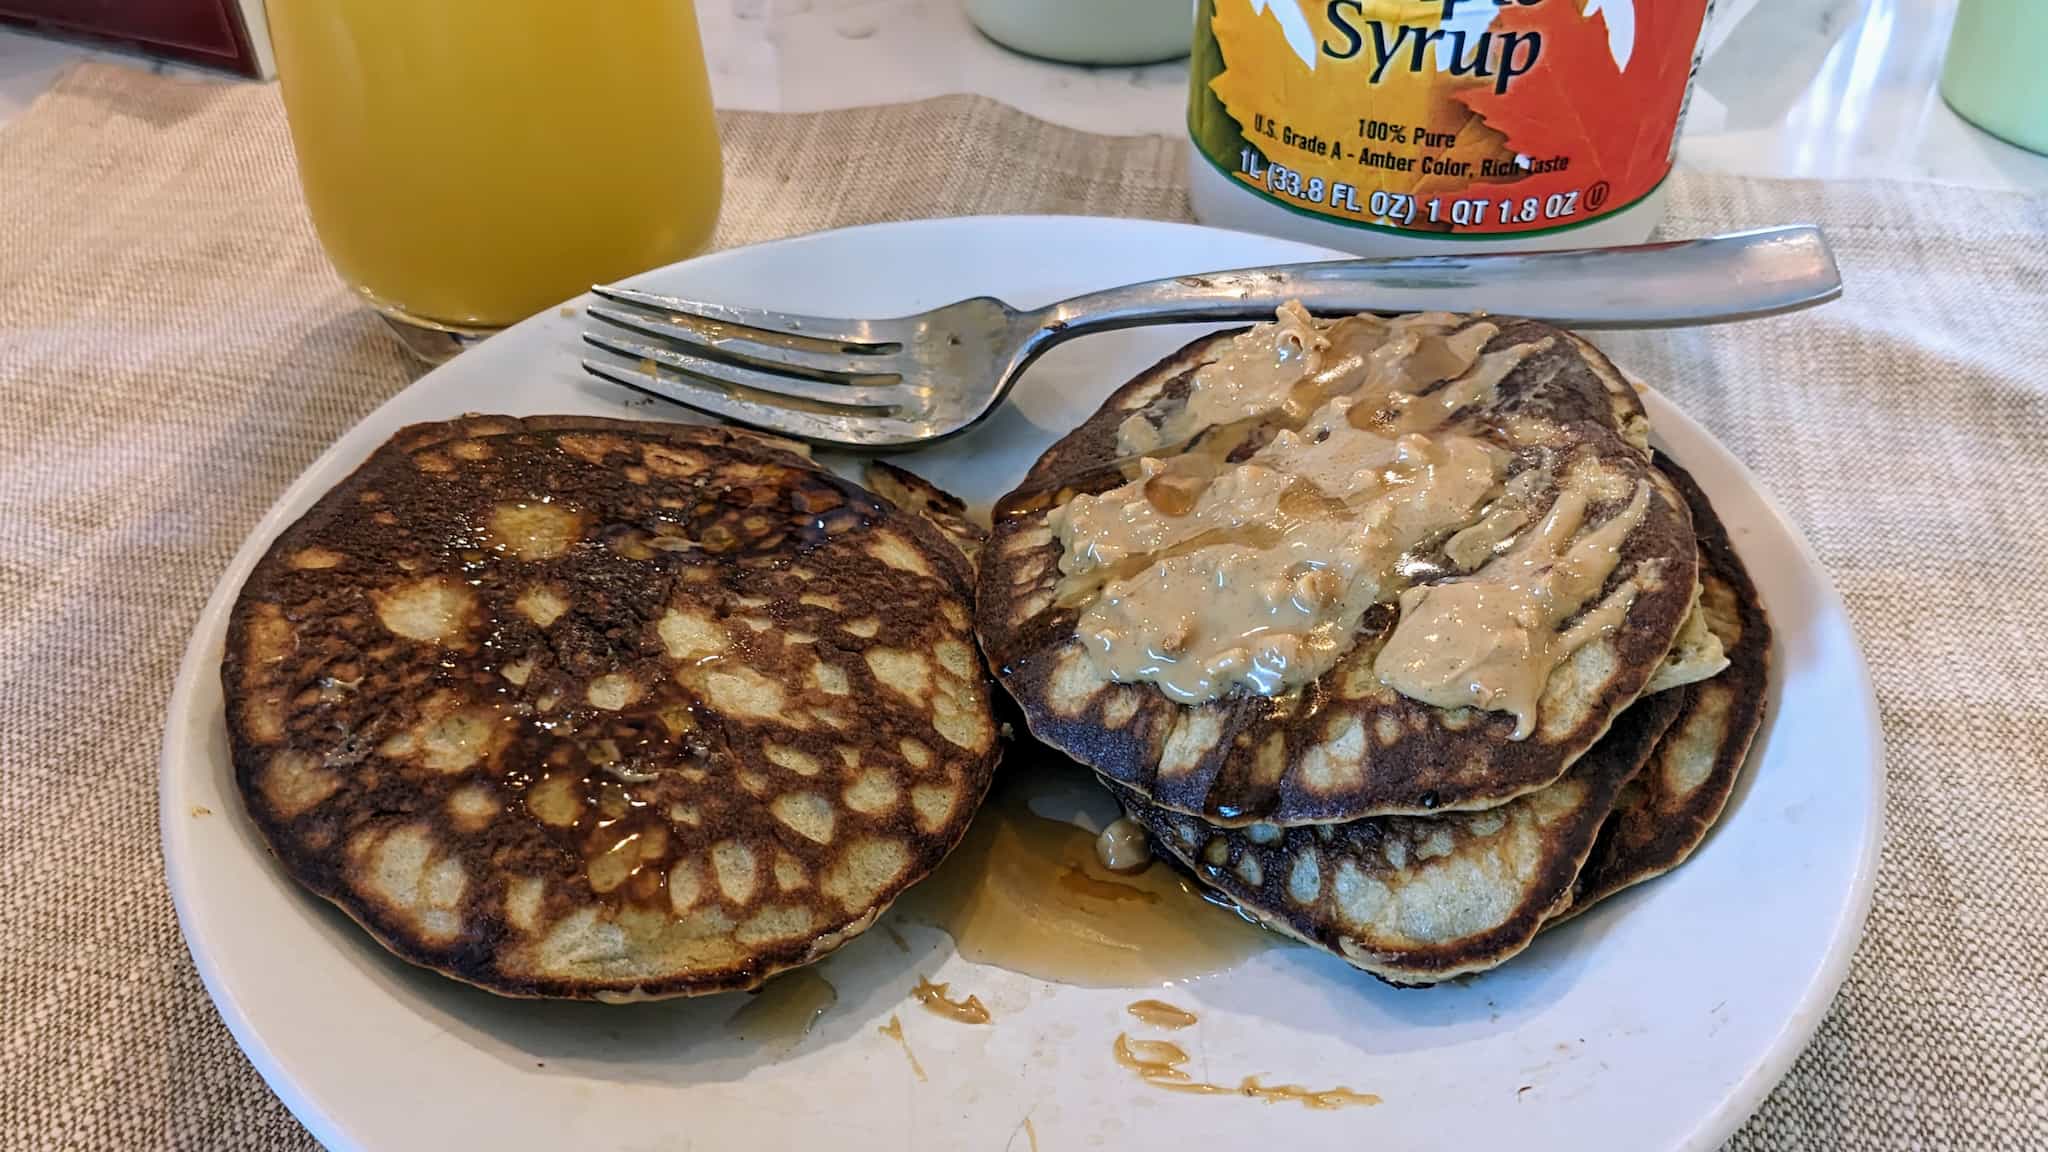 Plate of pancakes with peanut butter and syrup